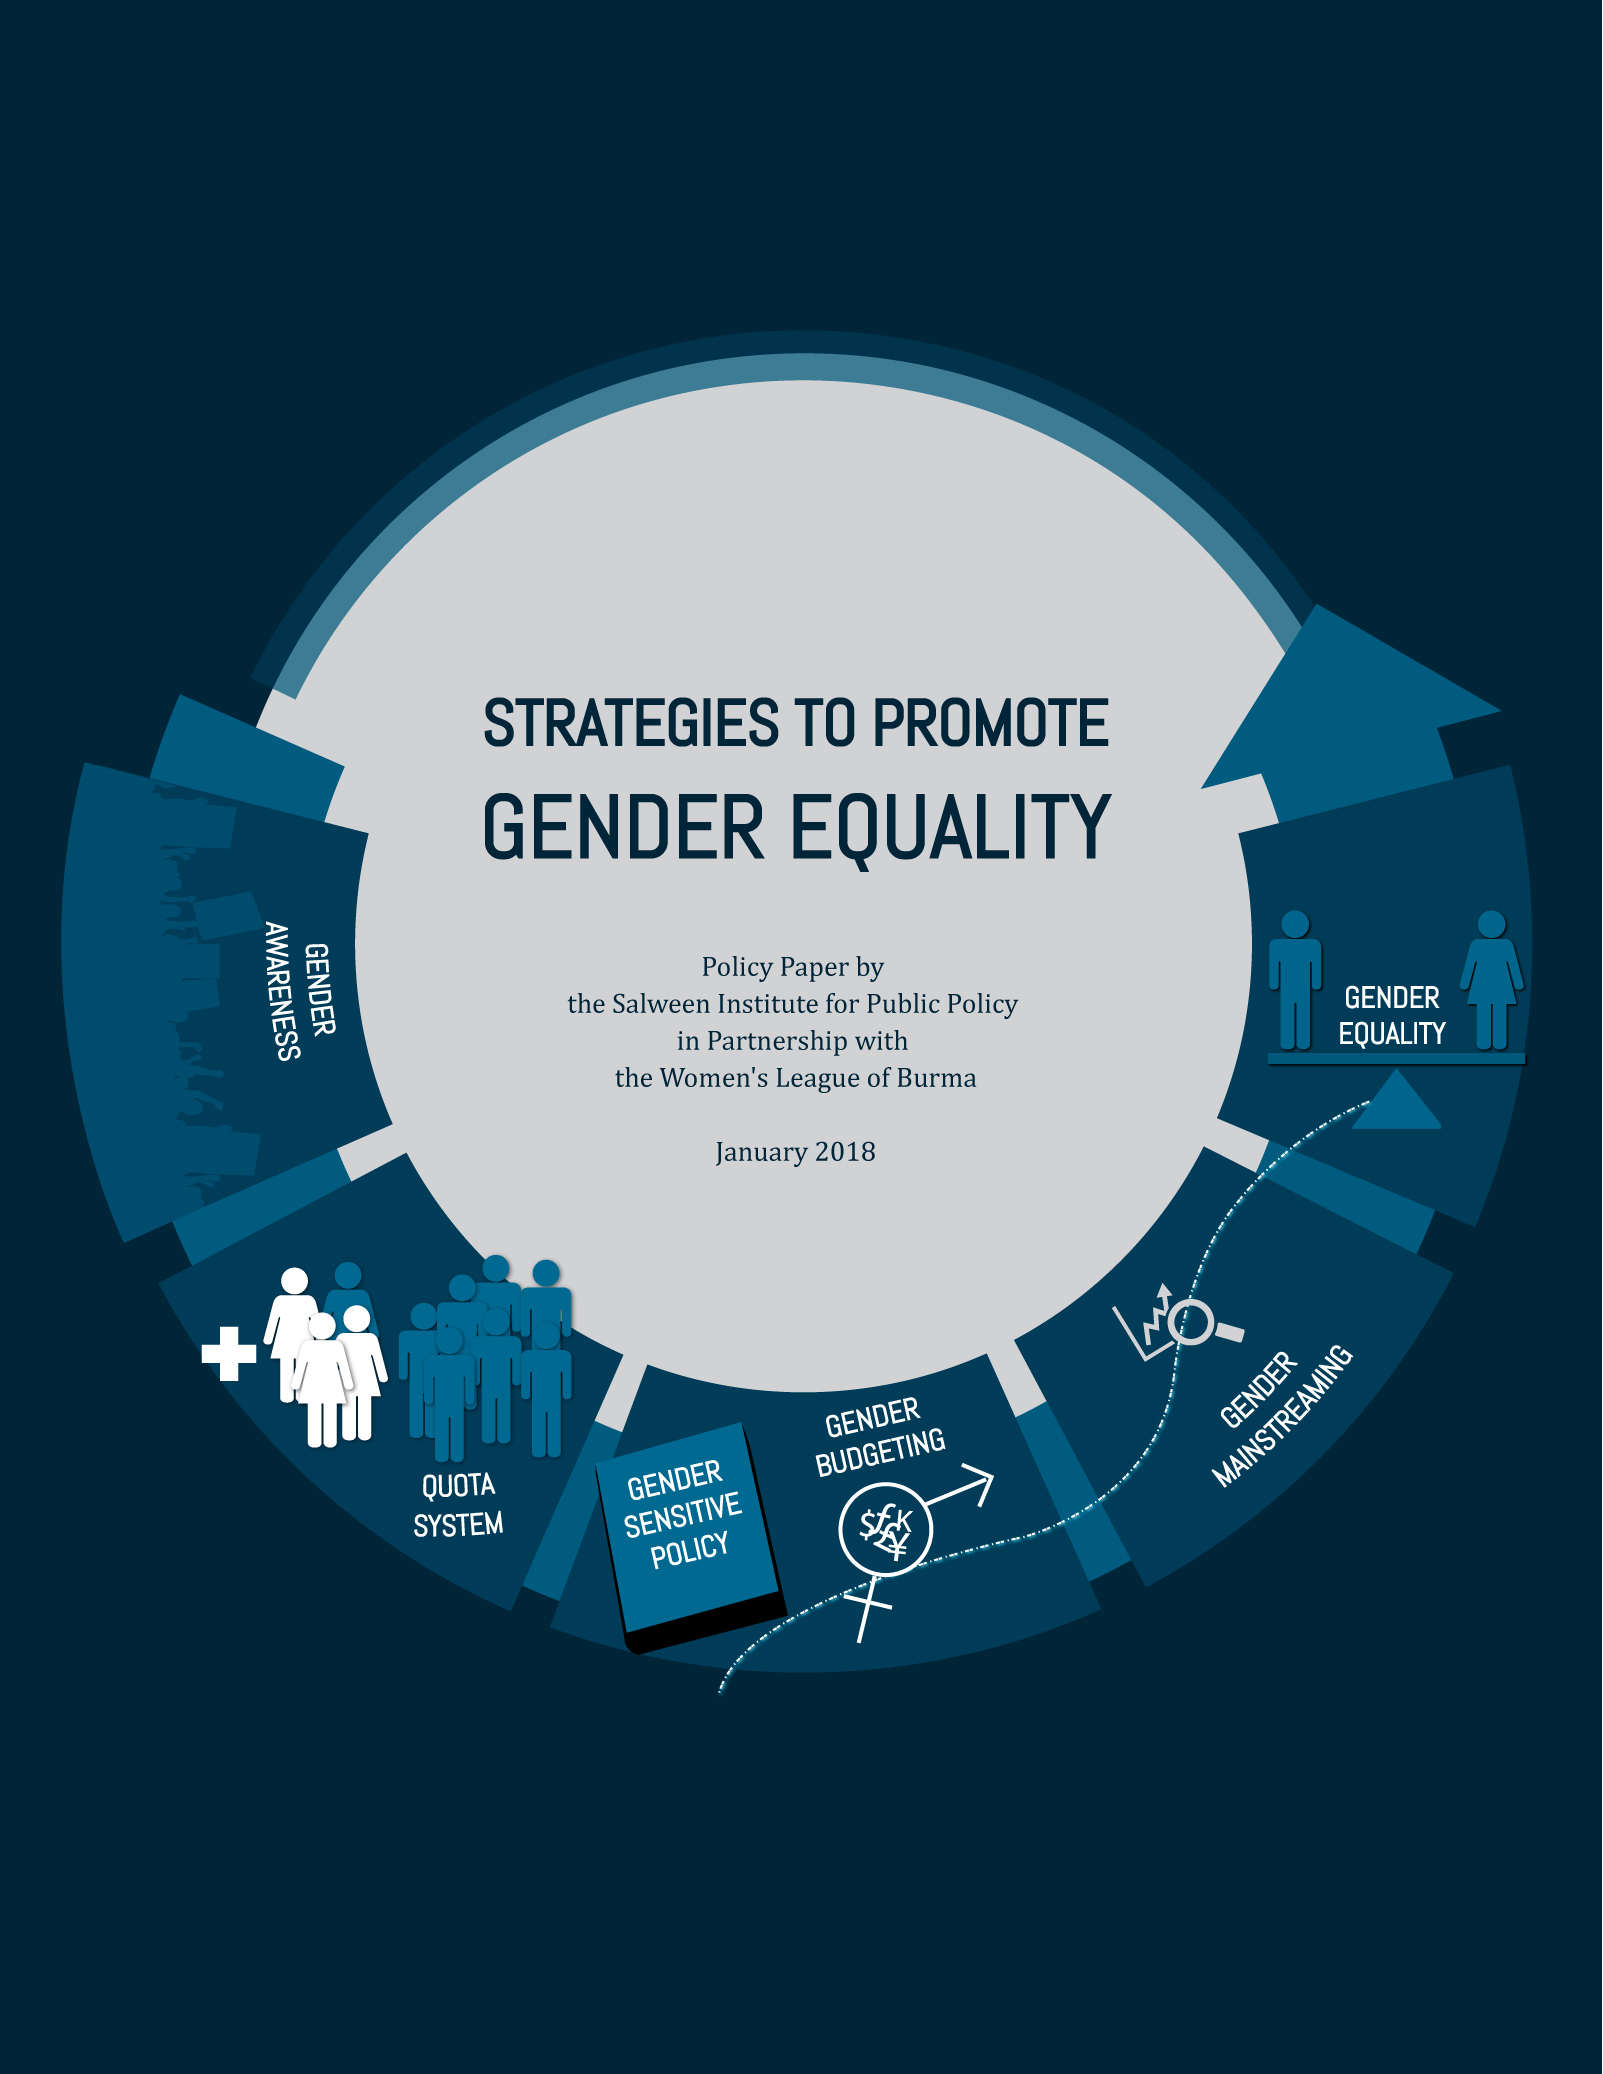 STRATEGIES TO PROMOTE GENDER EQUALITY